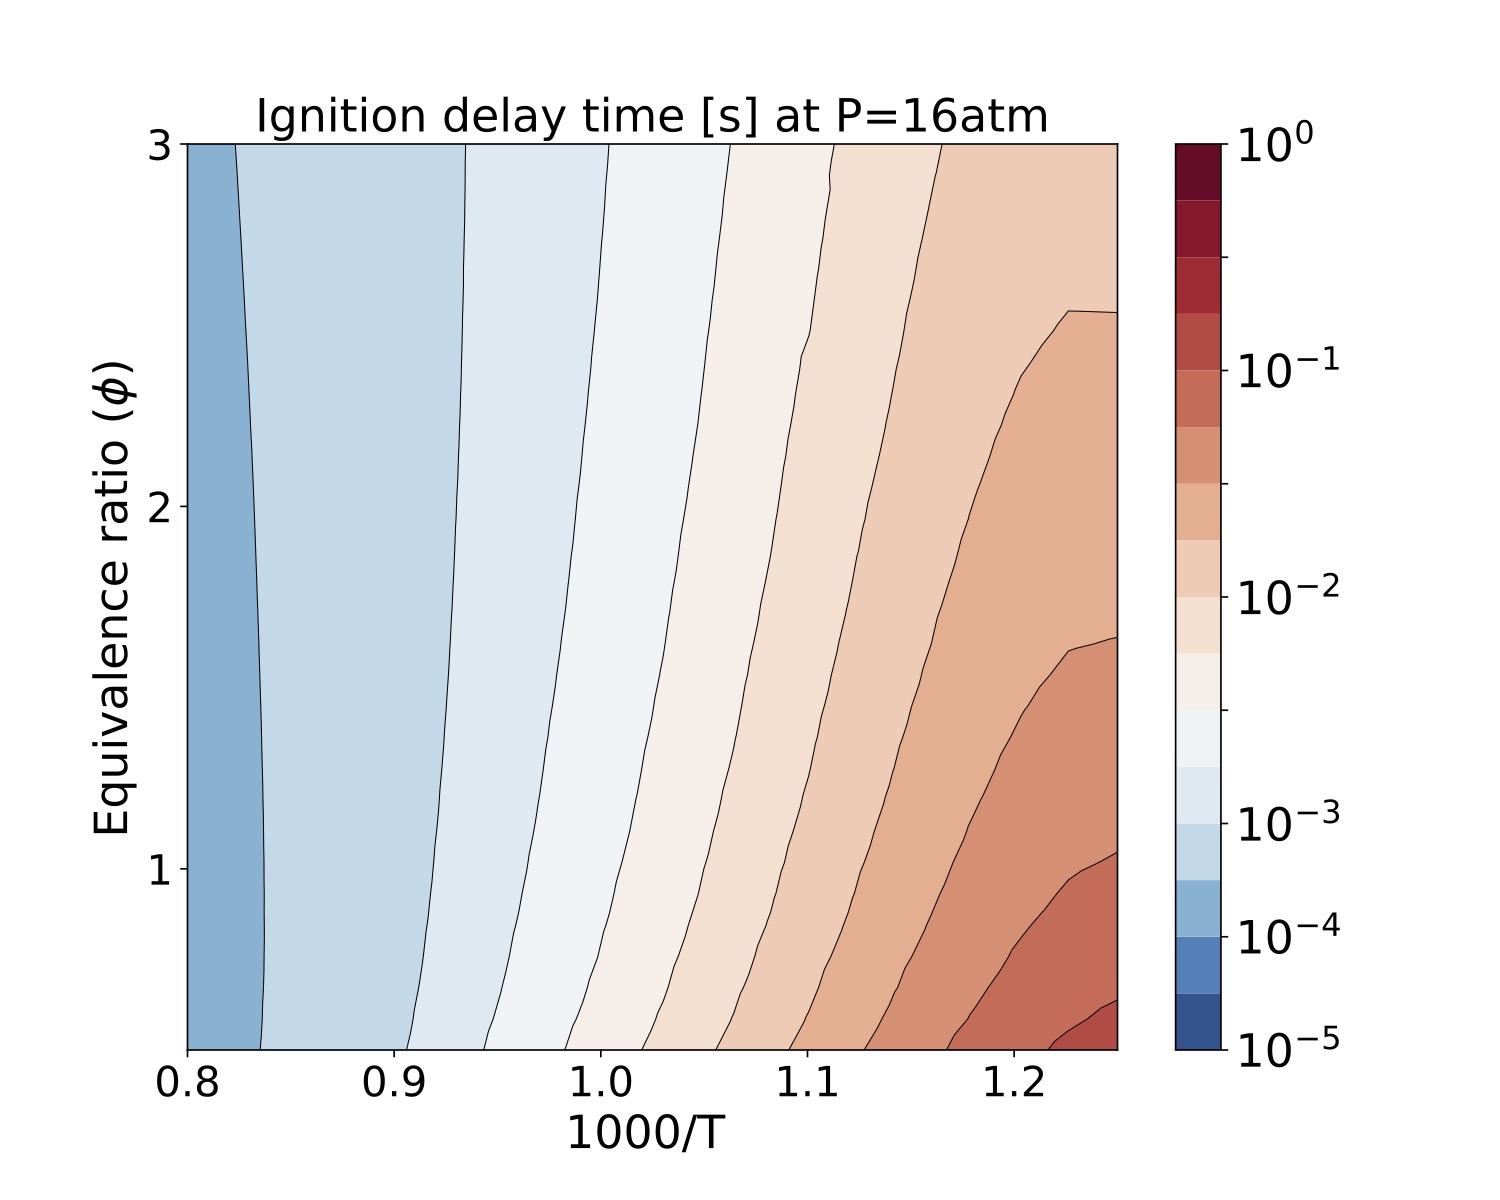 Ignition delay time (s) of isooctane at 16 atm